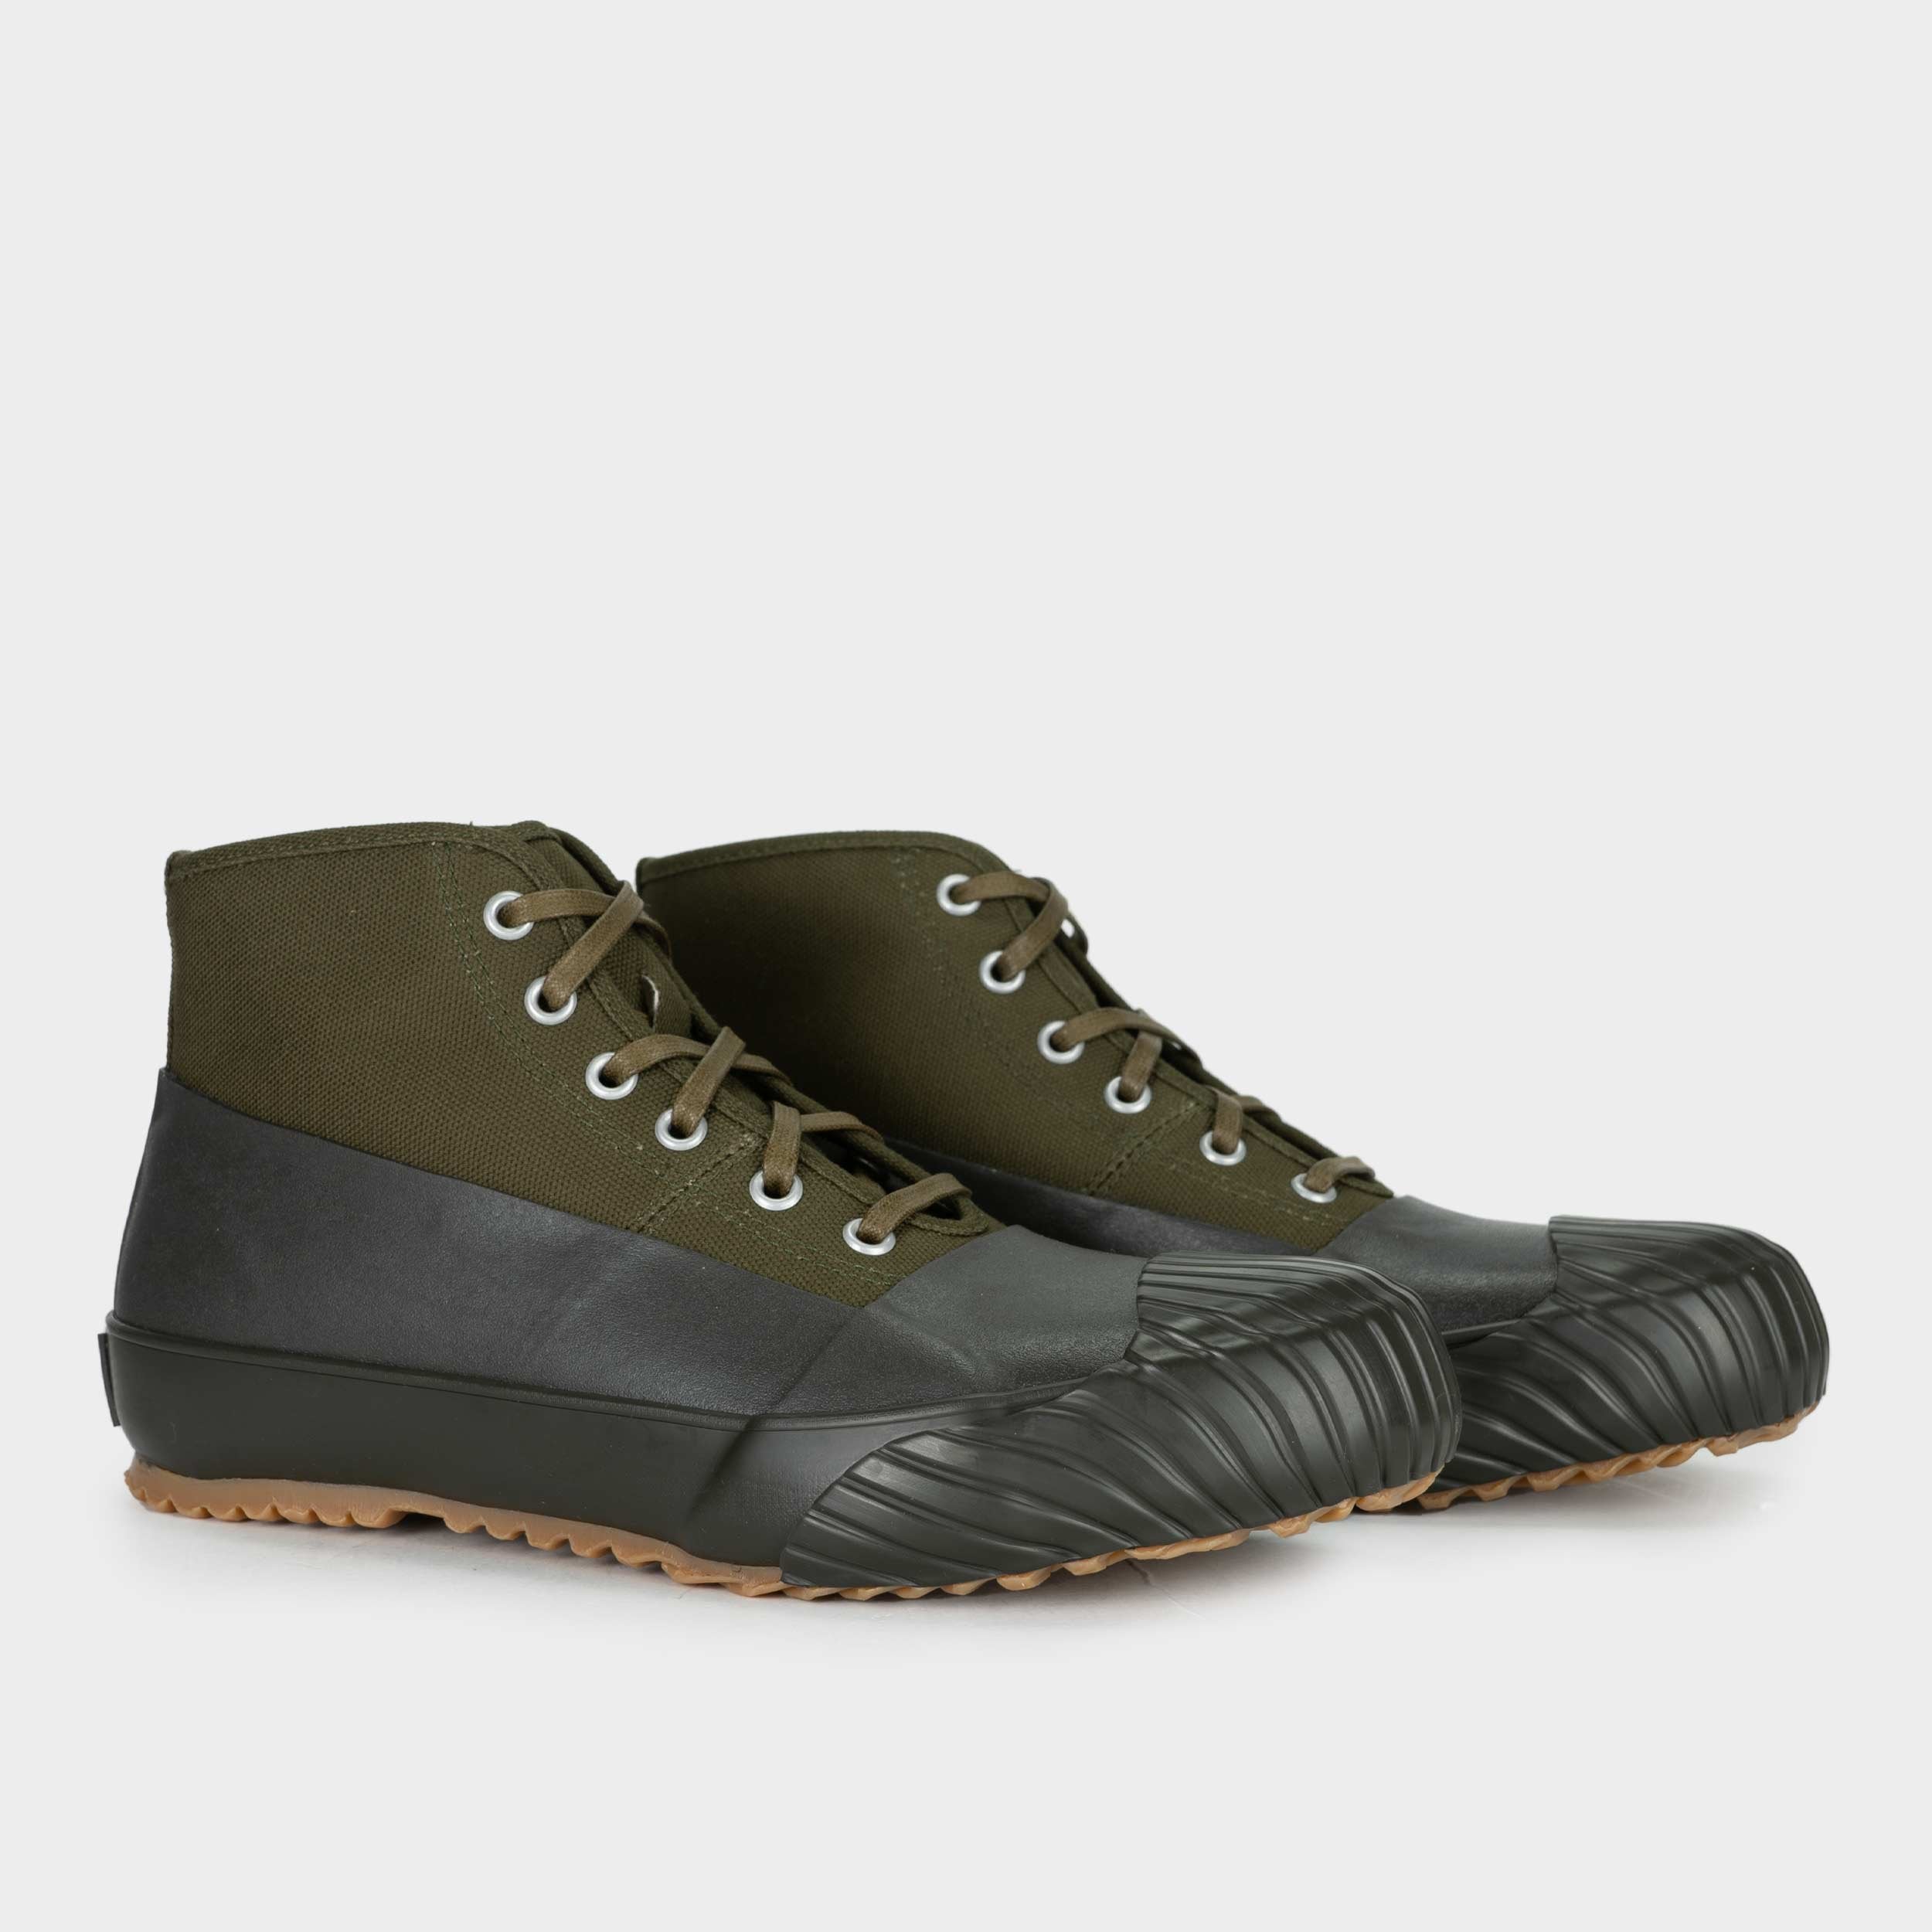 (Waitlist) Japanese All Weather High Top in Olive